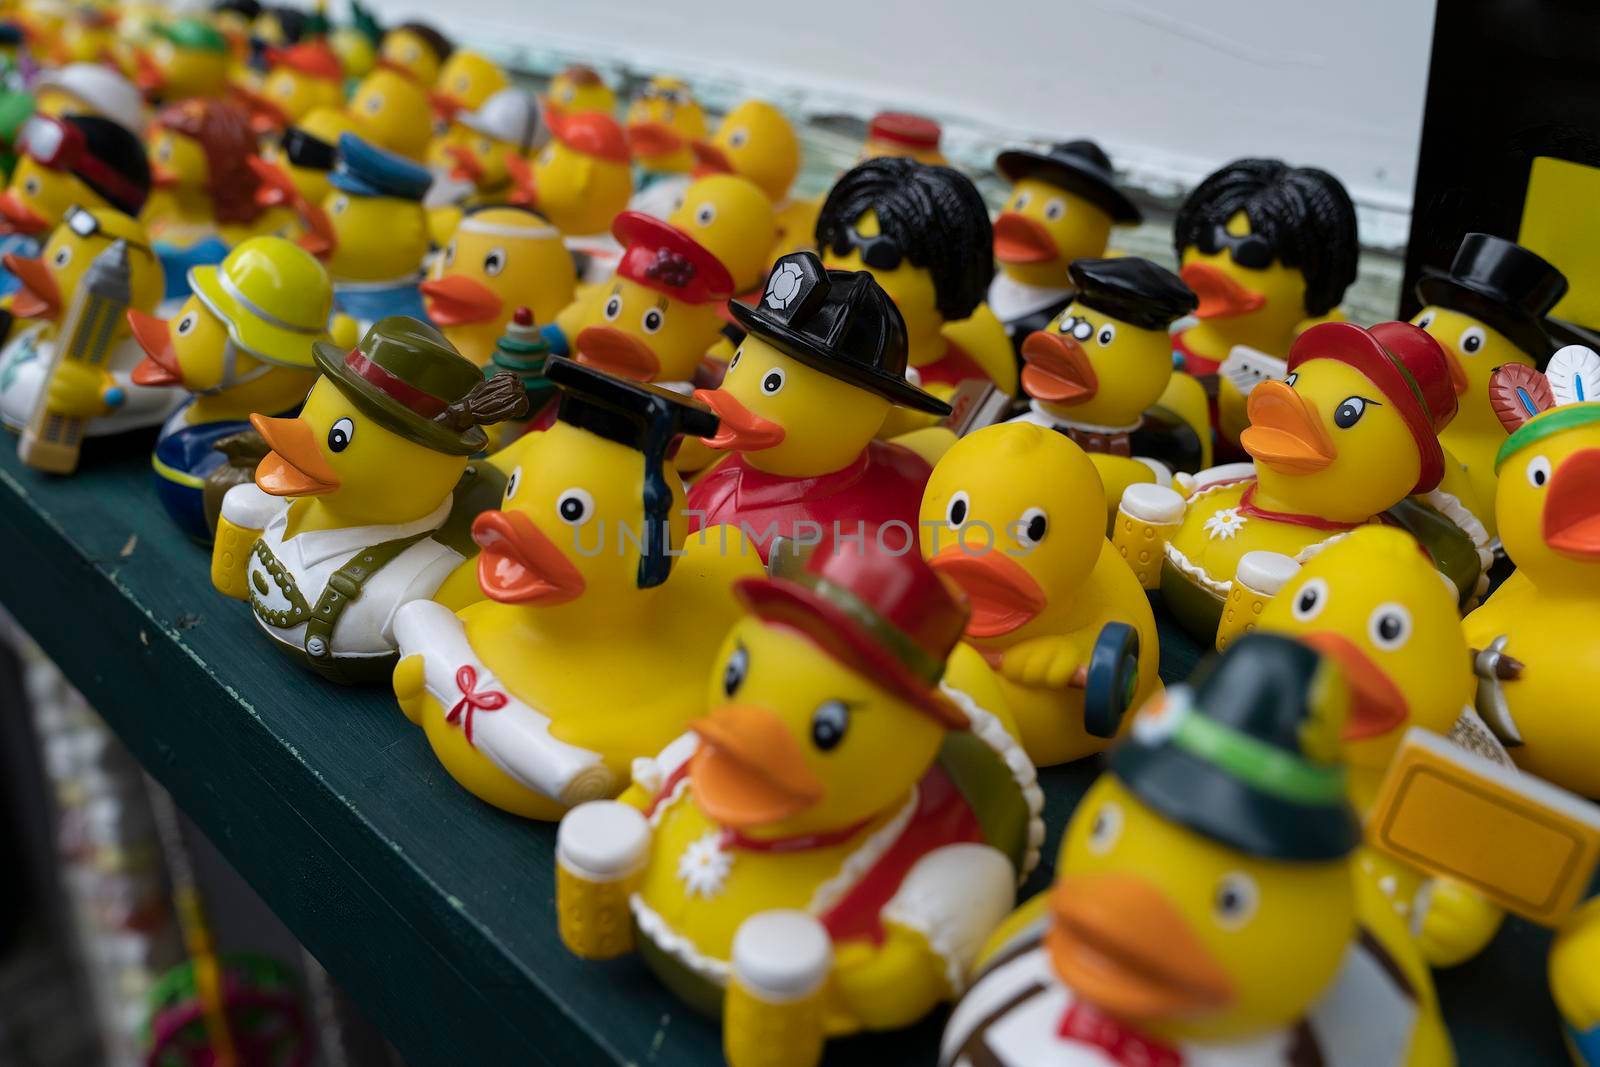 A group with many different figurines rubber ducks bathing toys on a shelf